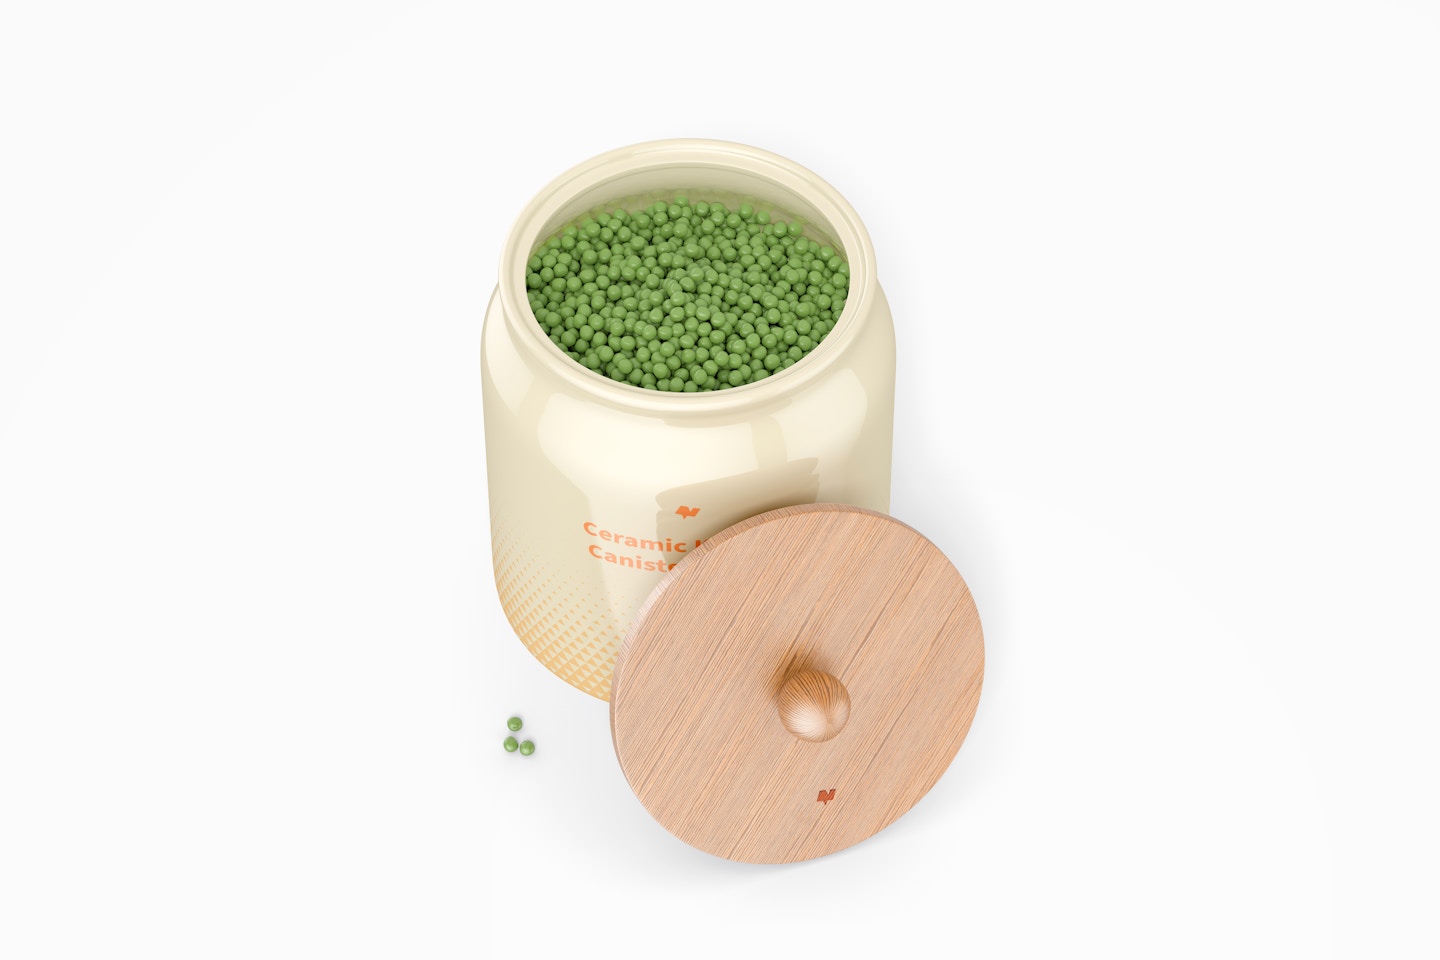 Ceramic Kitchen Canister Mockup, Top View